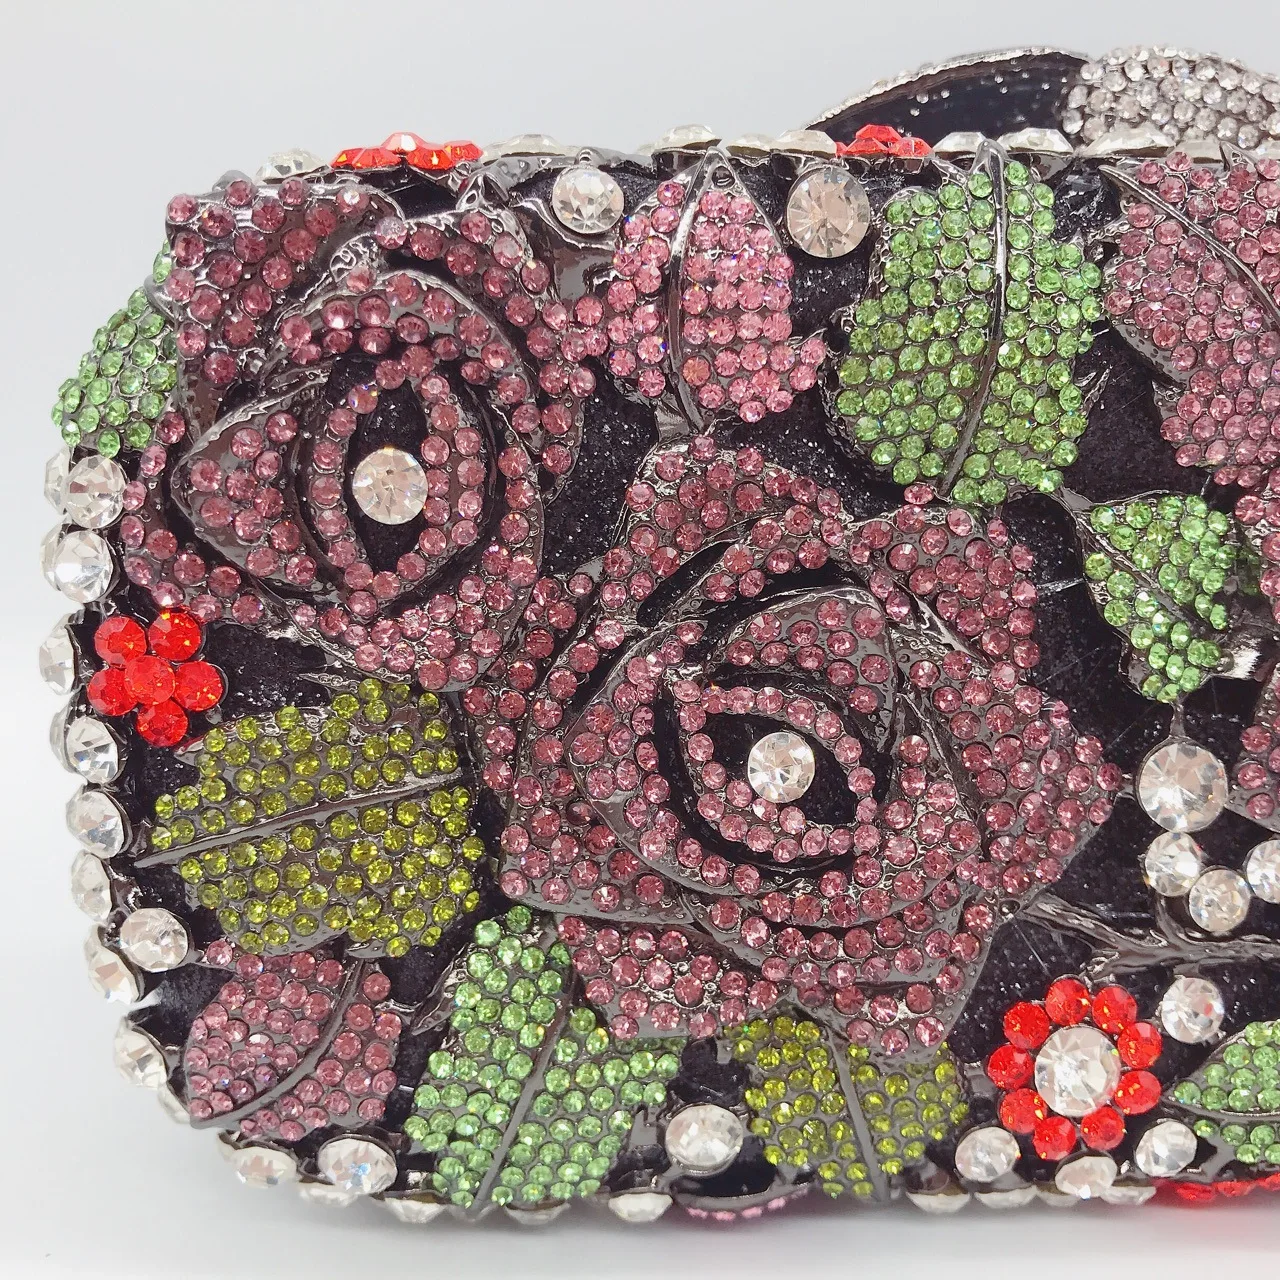 Amiqi MRY92 Luxury bling party floral crystal beaded clutch bridal flower shape lady purses evening bags